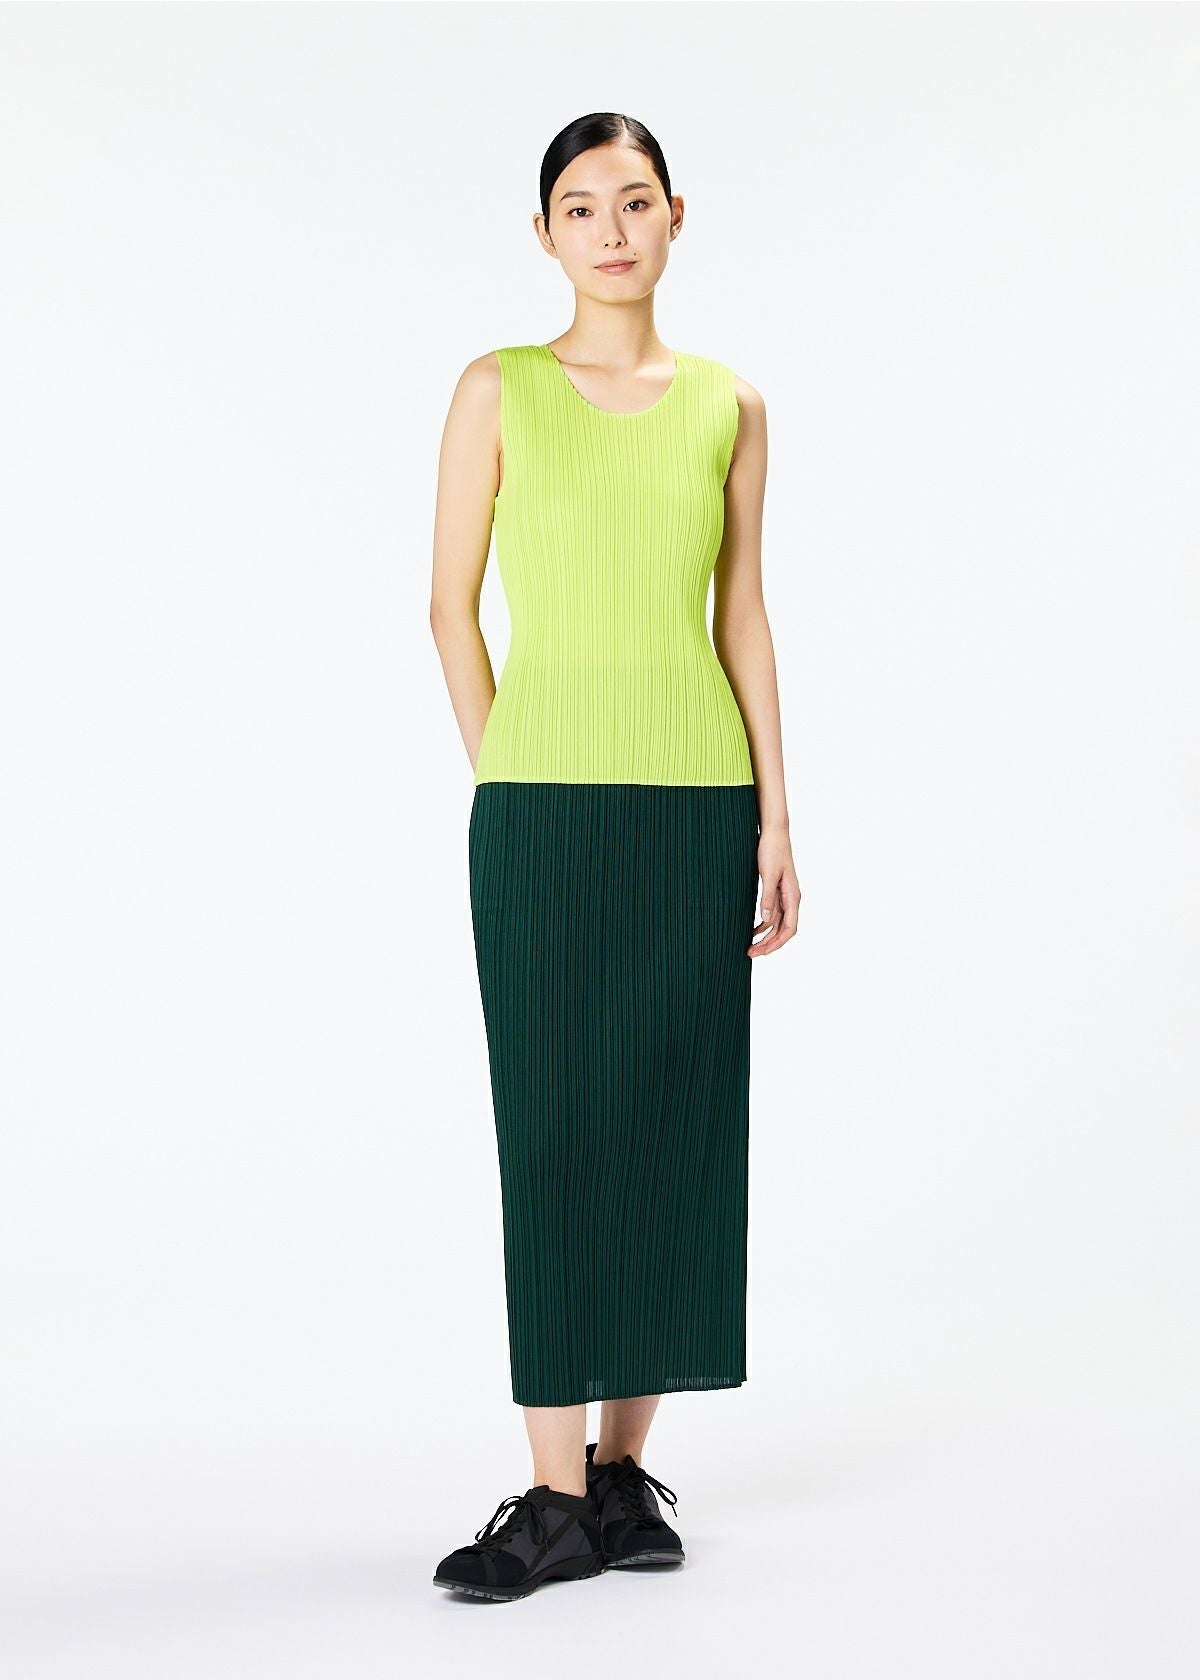 NEW COLORFUL BASICS 3 TOP | The official ISSEY MIYAKE ONLINE STORE